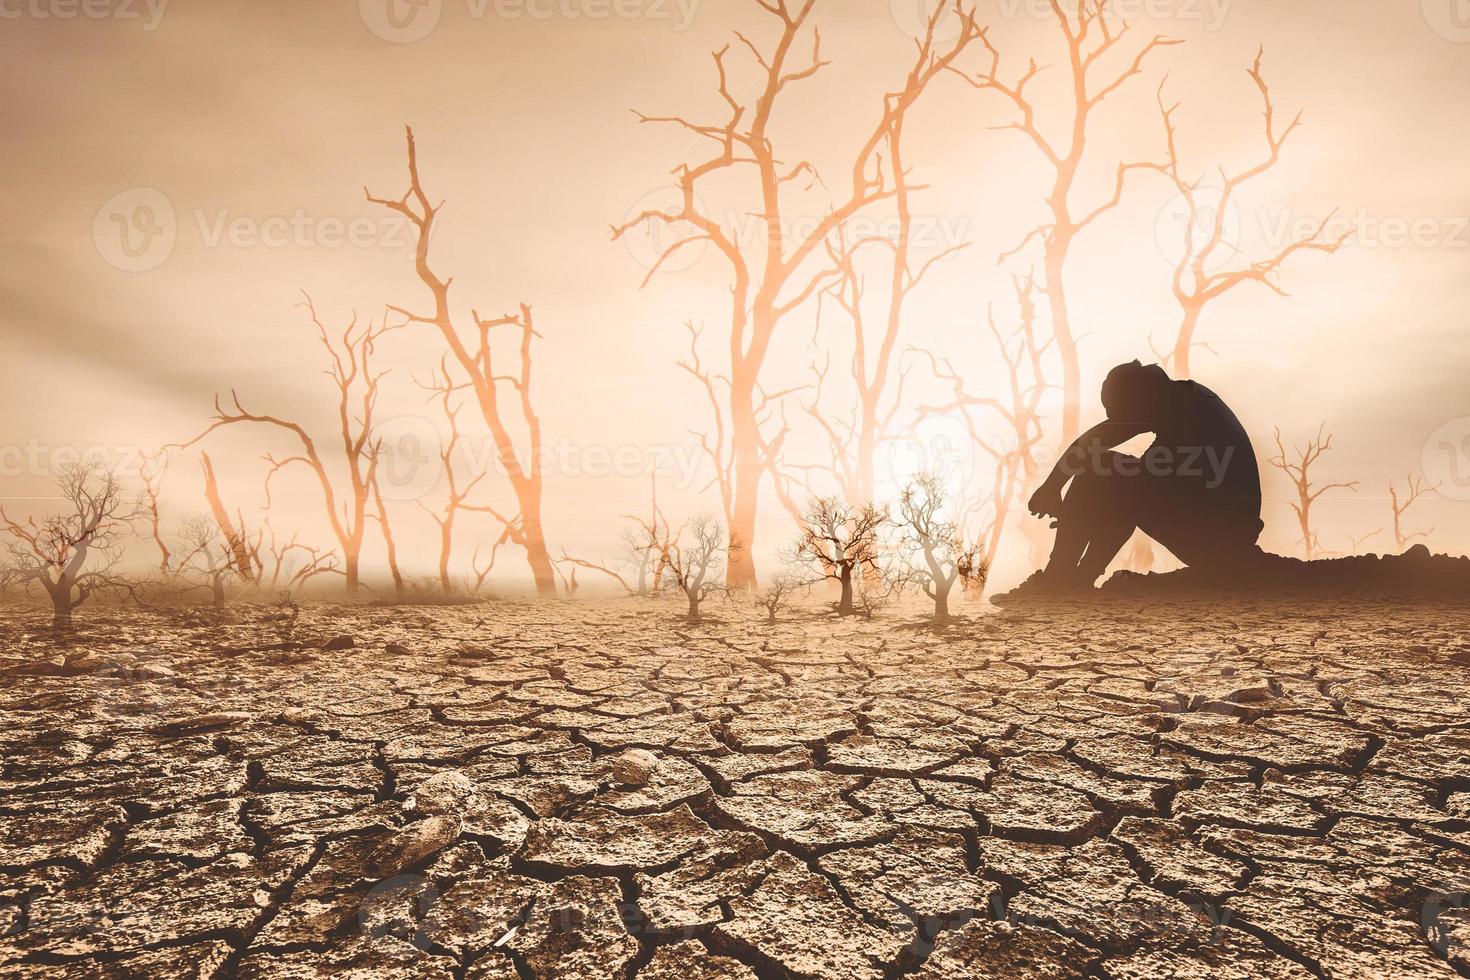 concept of global warming and drought People sat mourning over the drought. A world without water and food shortages. water and food crisis photo